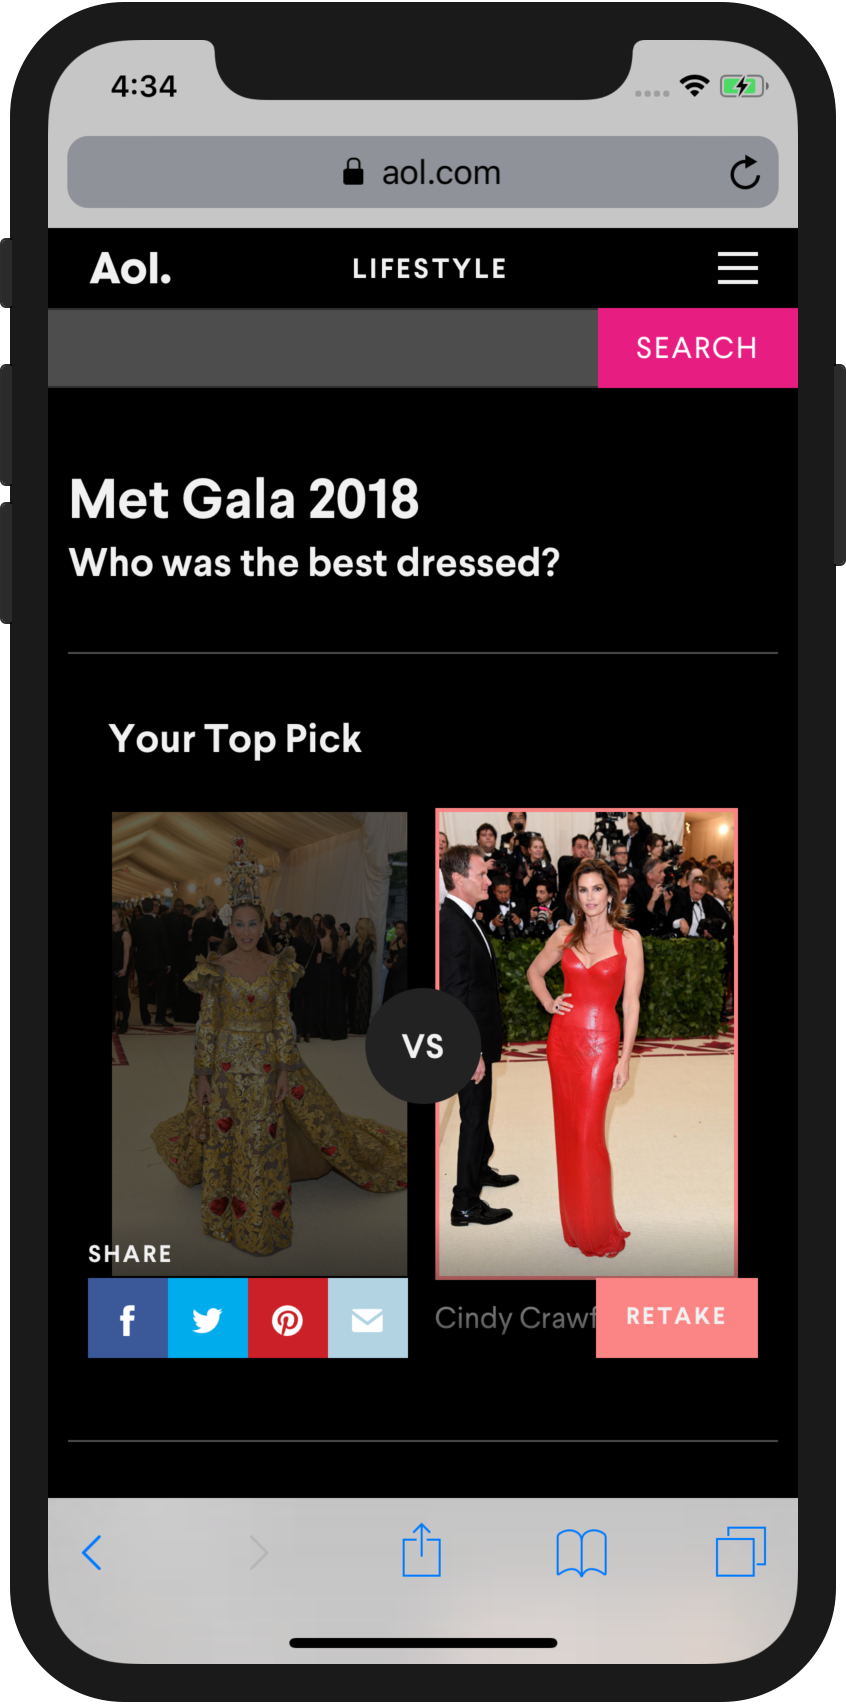 Screenshot of the Met Gala Bracket page on AOL.com, displayed on an iPhone X